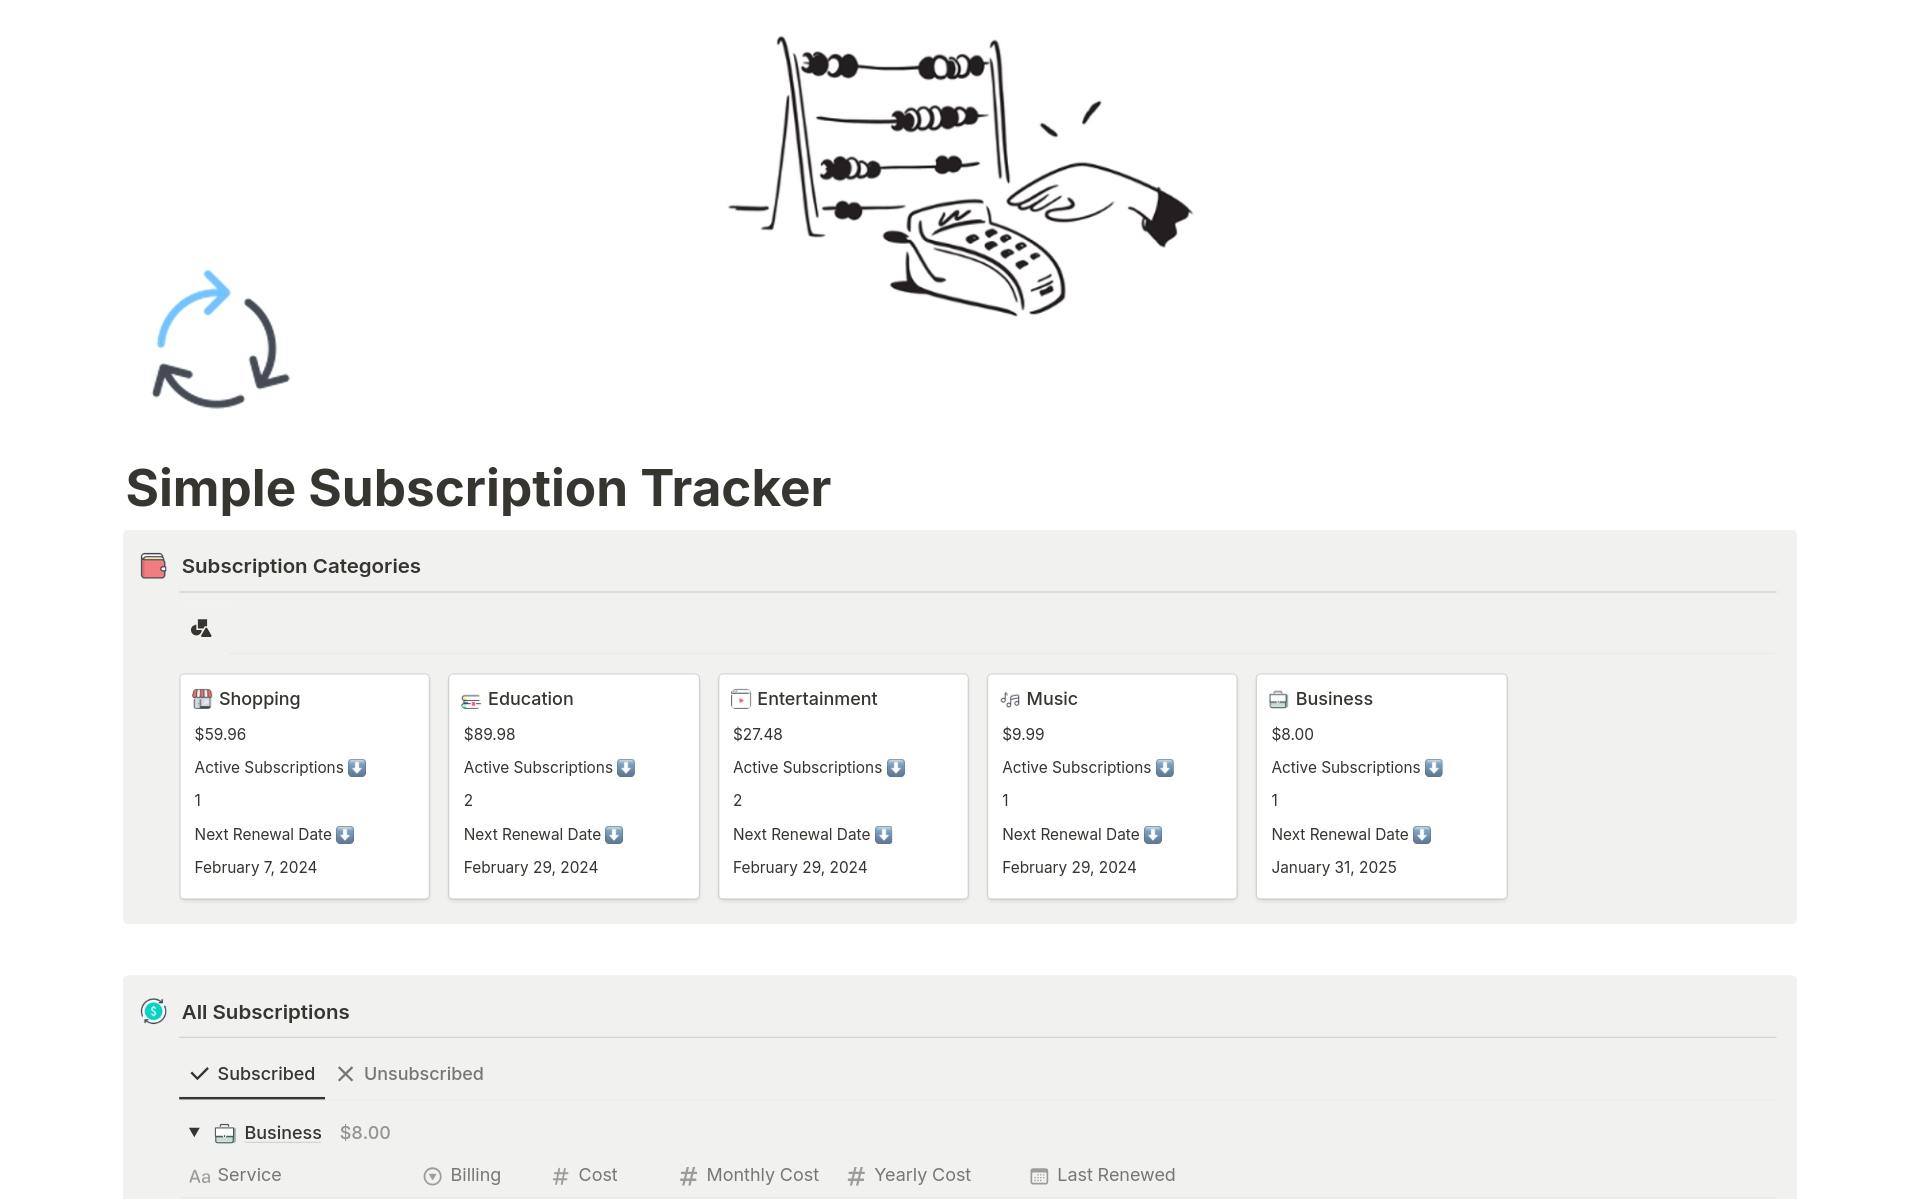 Introducing our Simple Subscription Tracker, the hassle-free solution to effortlessly manage all your subscriptions in one place. Say goodbye to complicated spreadsheets and overwhelming apps. 